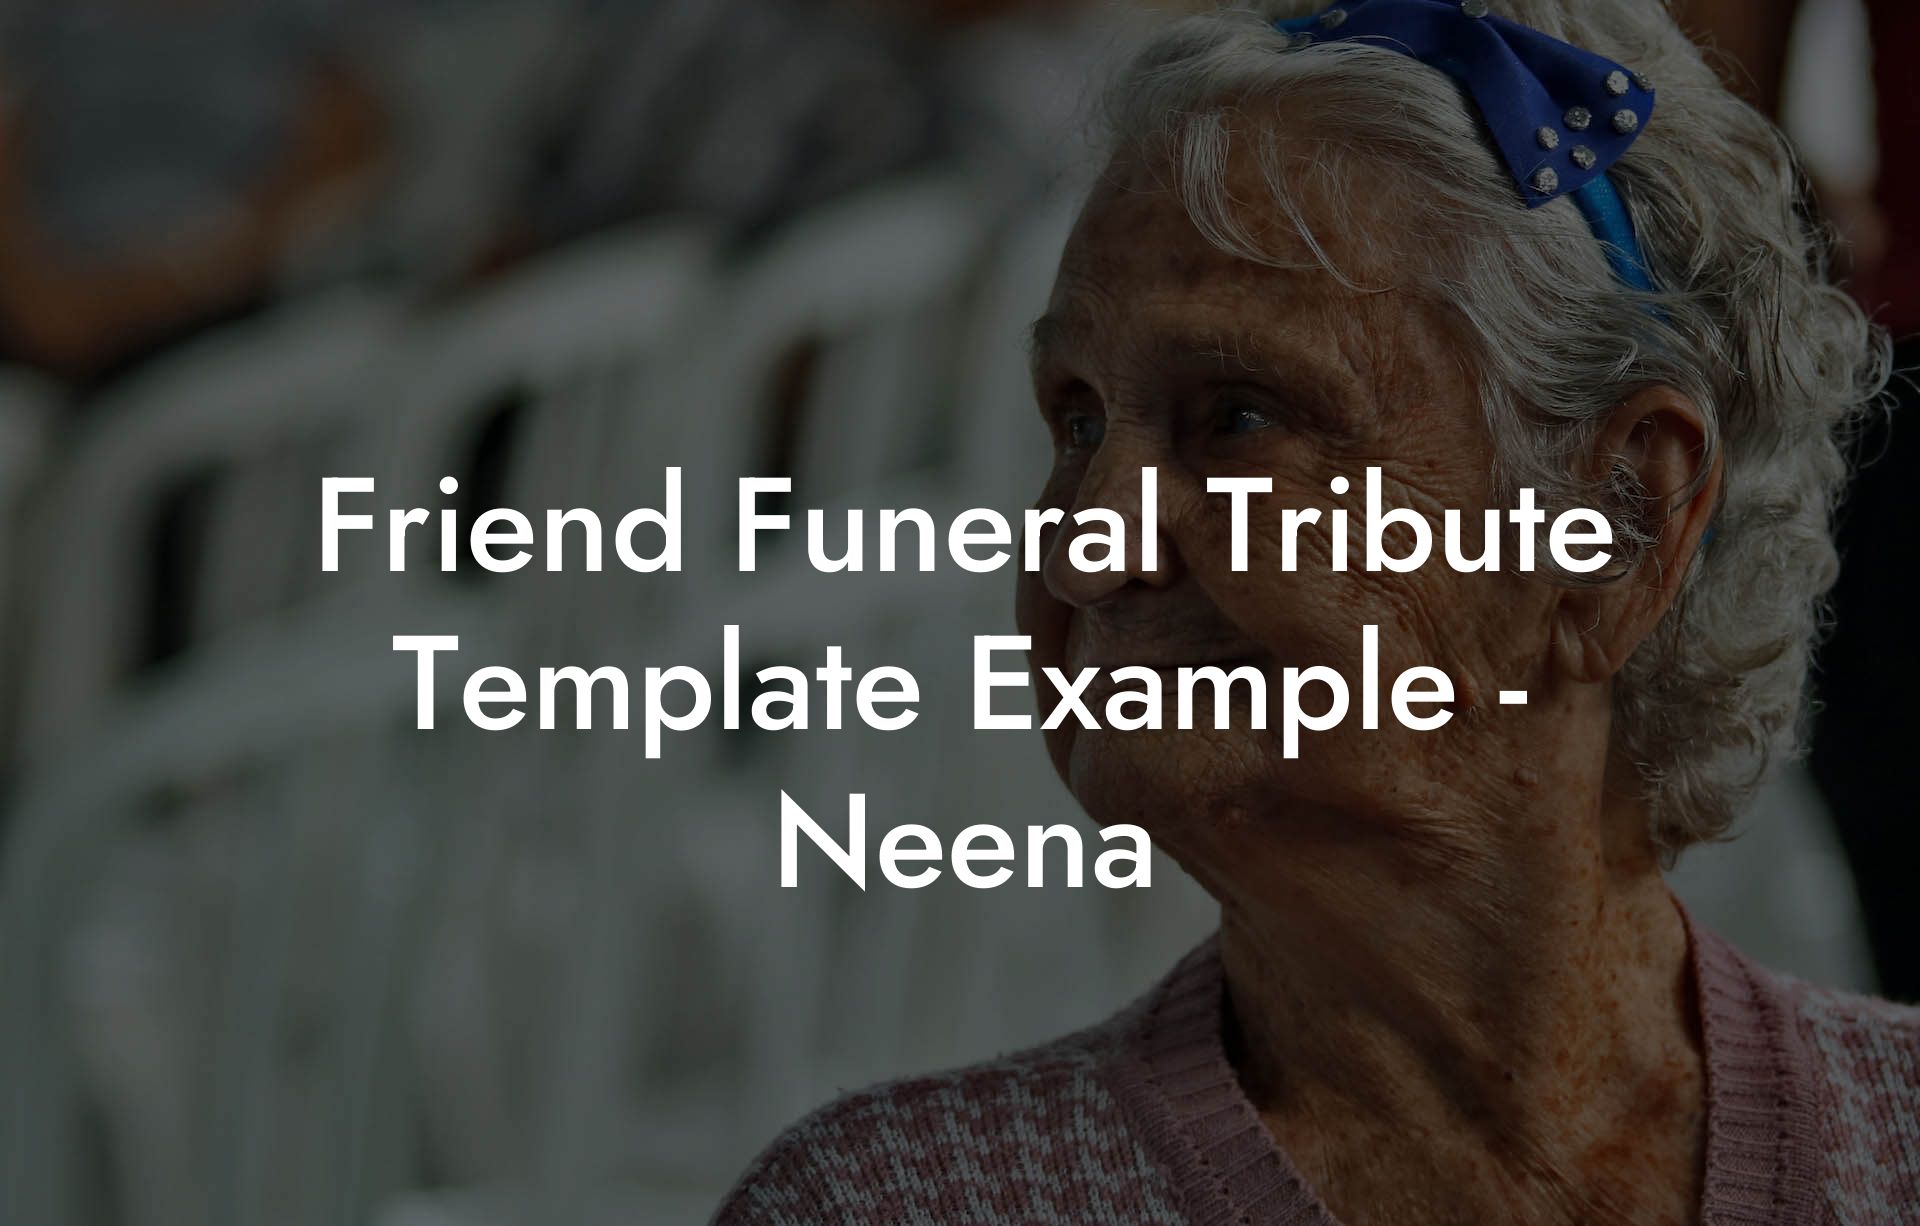 Friend Funeral Tribute Template Example - Neena